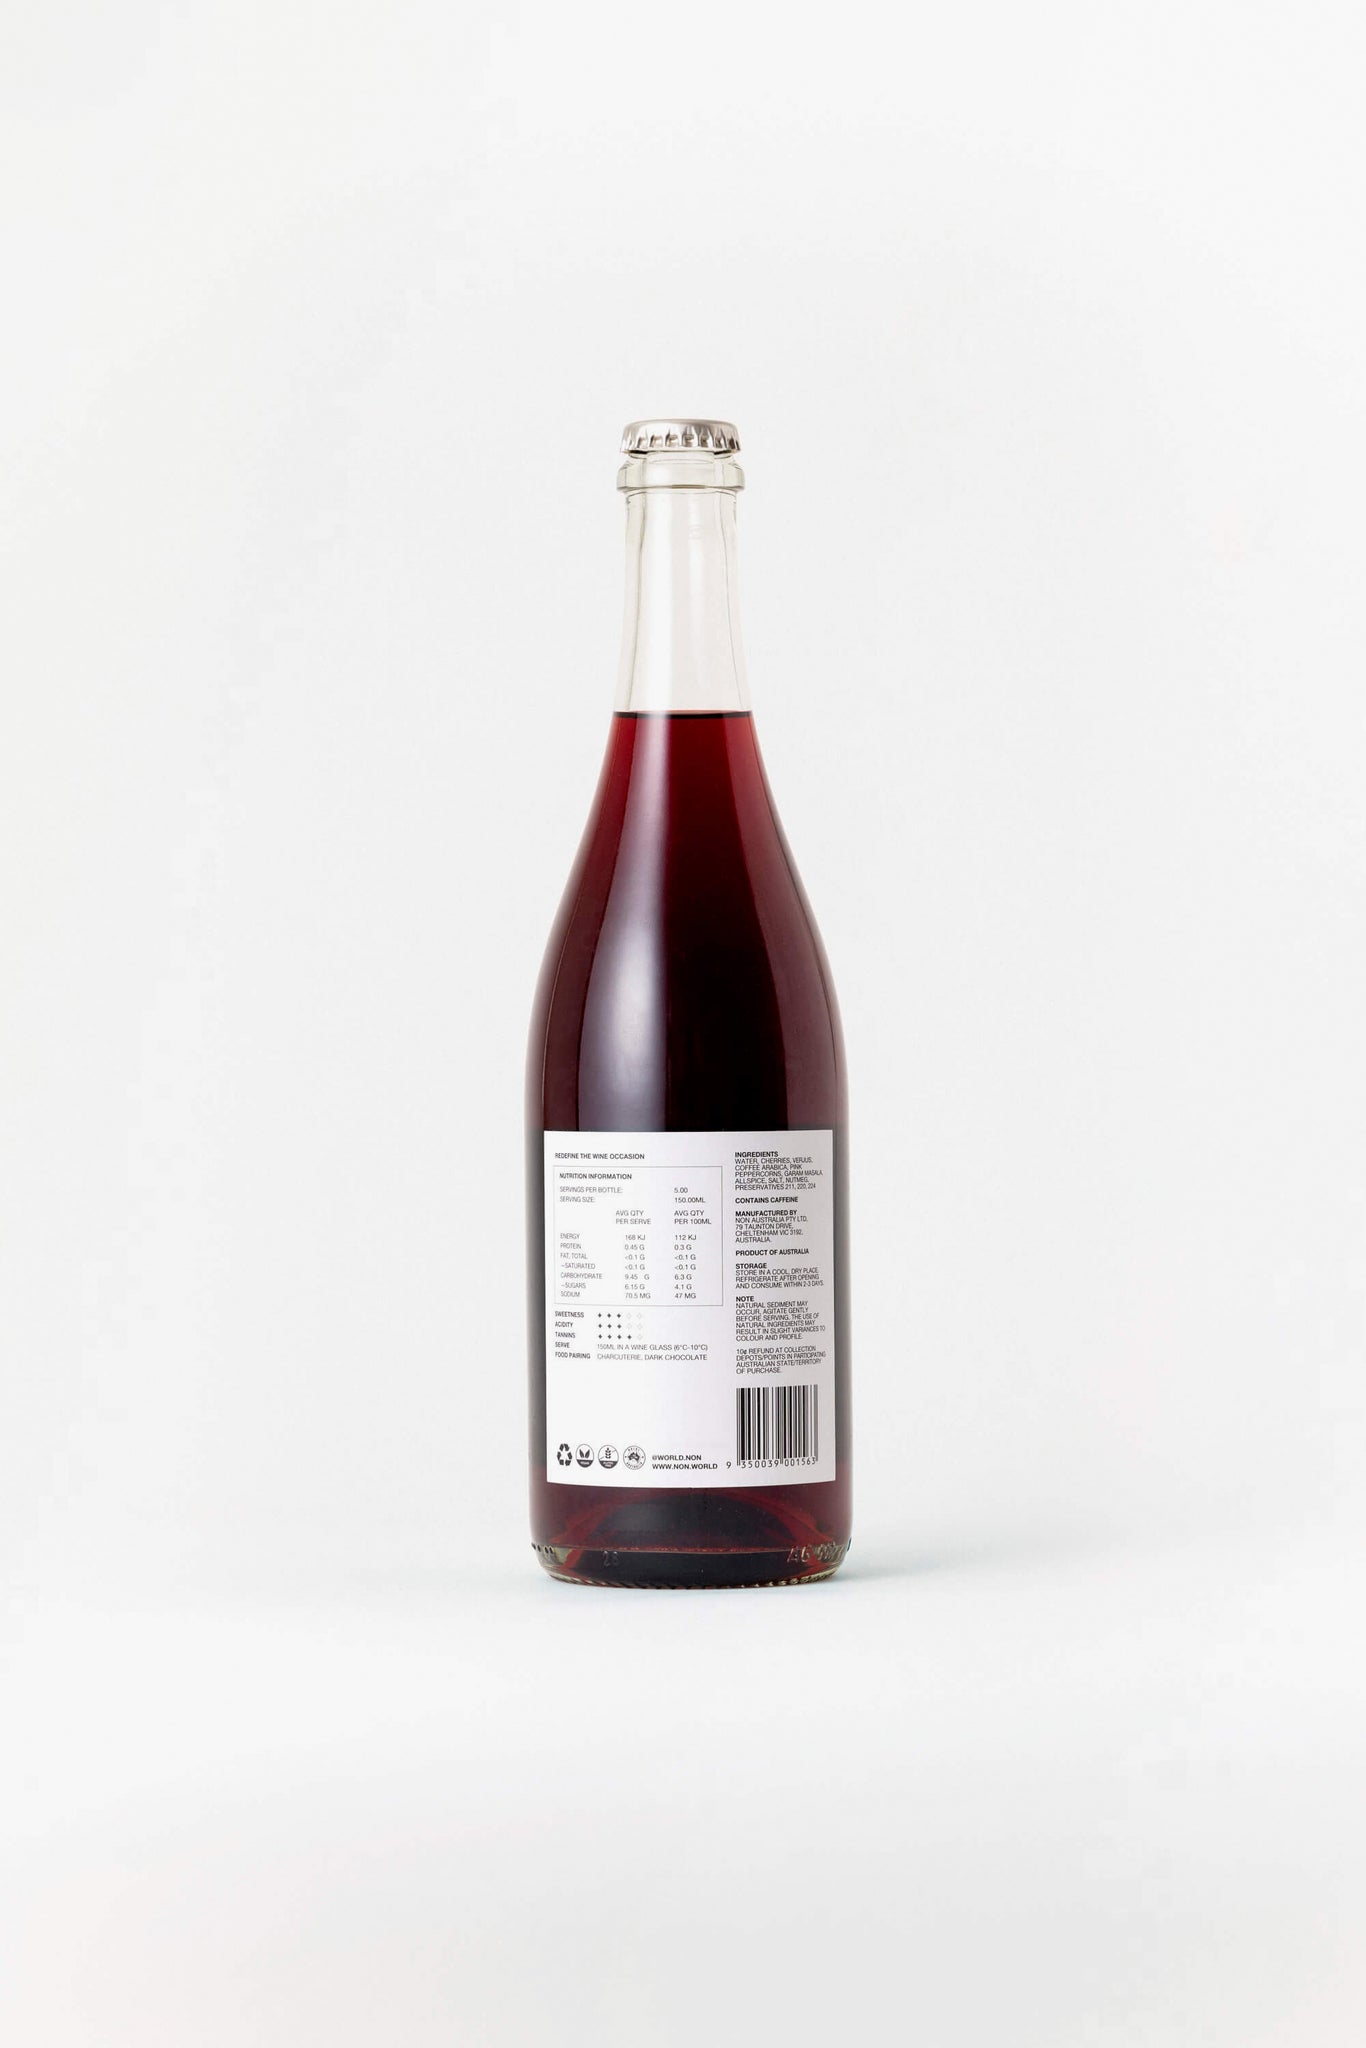 NON7 Stewed Cherry & Coffee bottle back